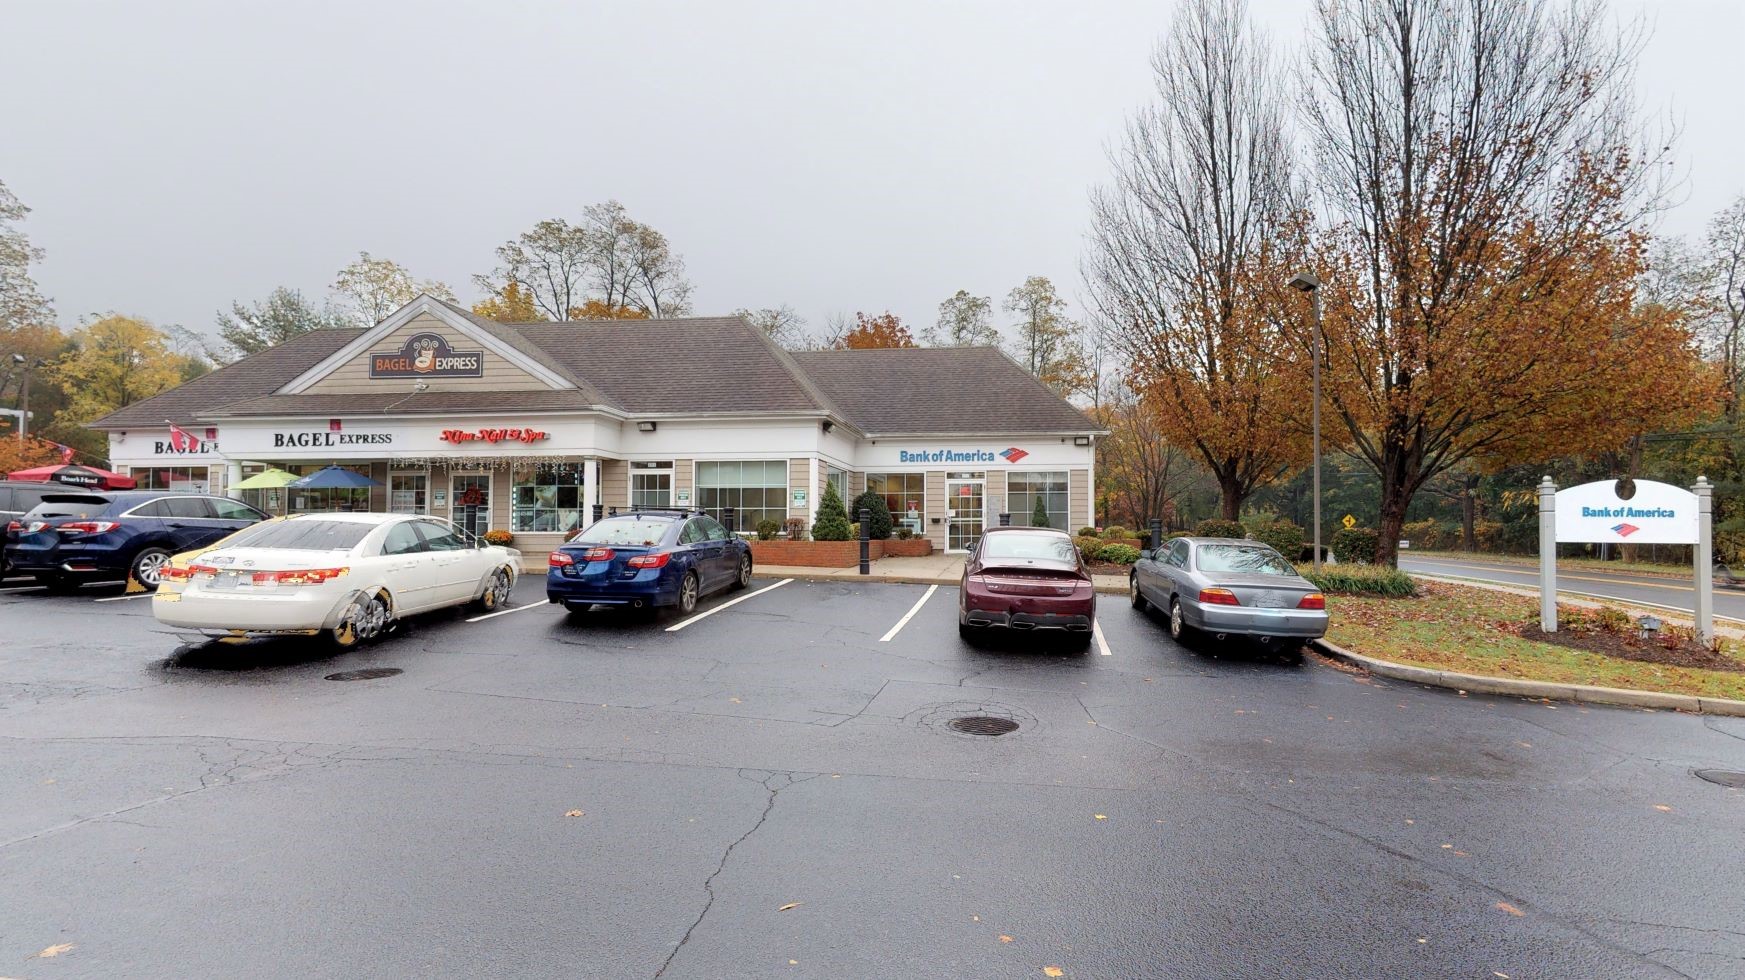 Bank of America financial center with walk-up ATM | 15 Bennetts Rd, East Setauket, NY 11733